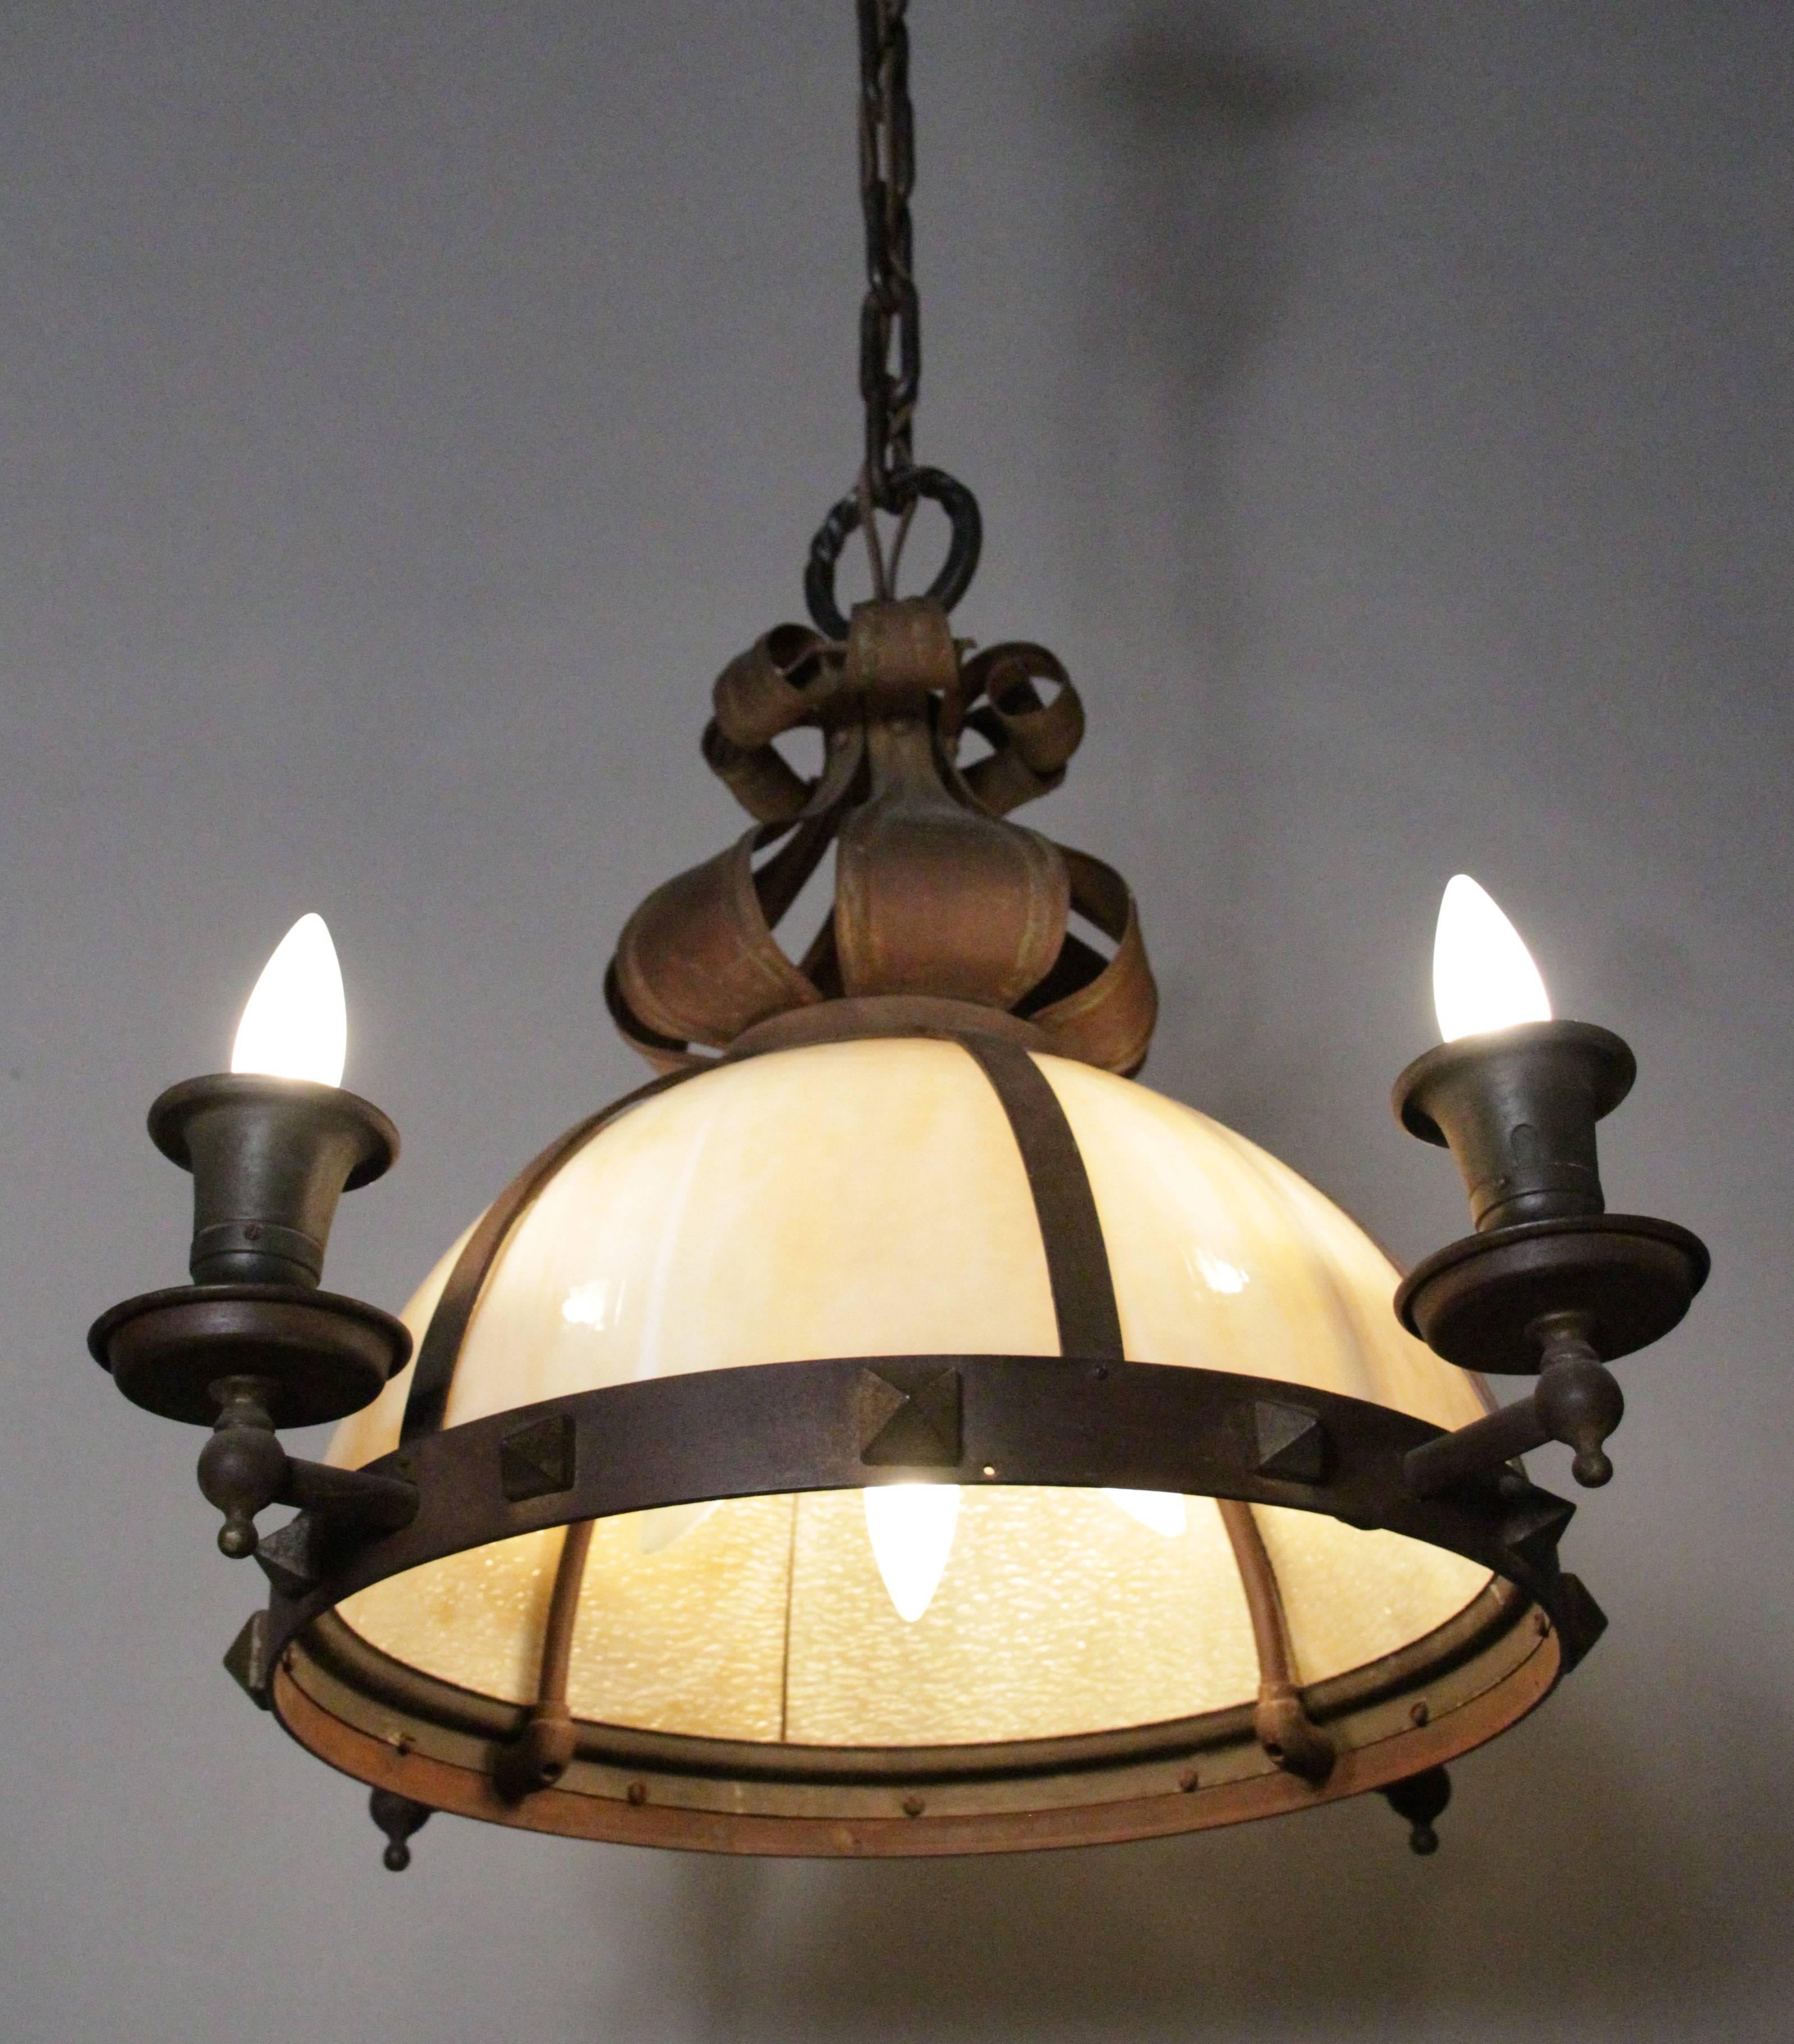 Arts & Crafts chandelier with curved slag glass, circa 1910. Salvaged from local arts and crafts bungalow.